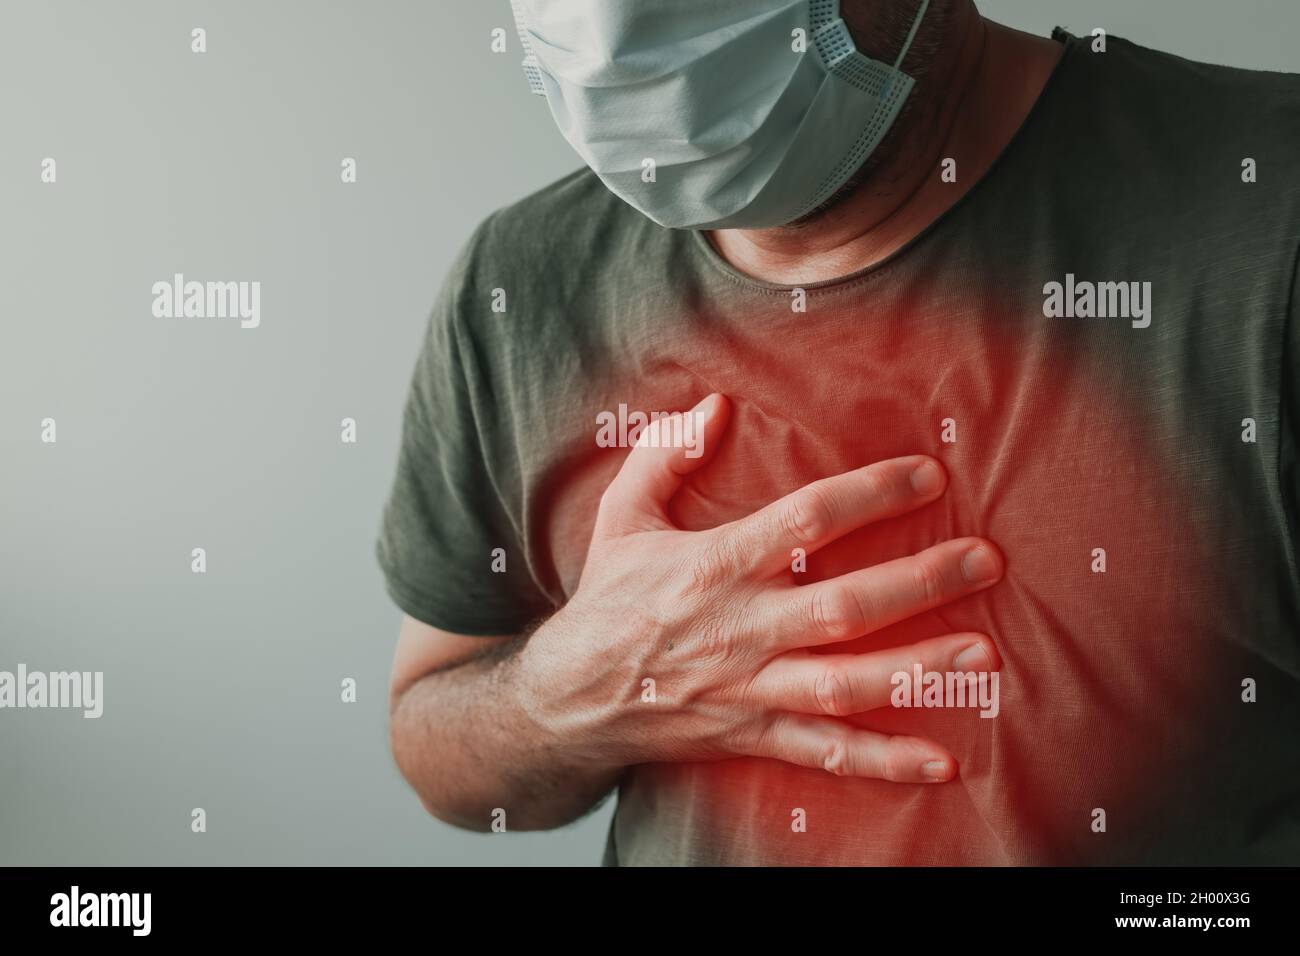 Covid-19 chest pain as infection symptom, man with respiratory mask holding a hand at his chest Stock Photo